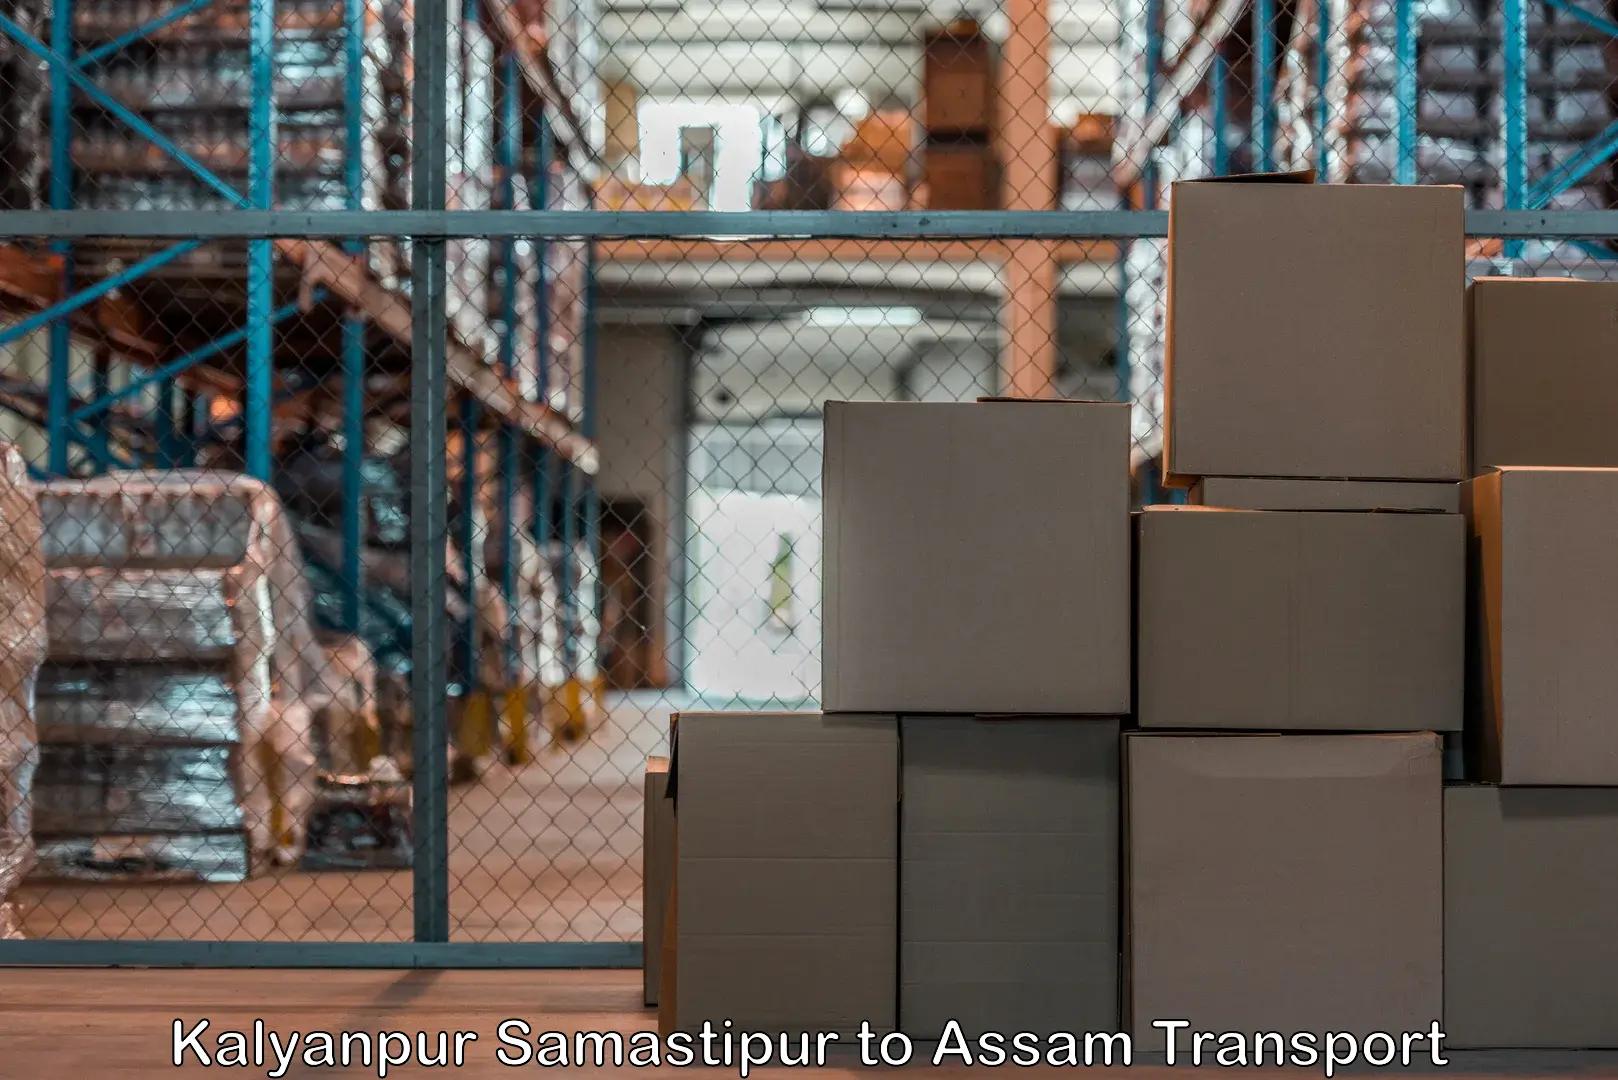 Truck transport companies in India Kalyanpur Samastipur to Lala Assam